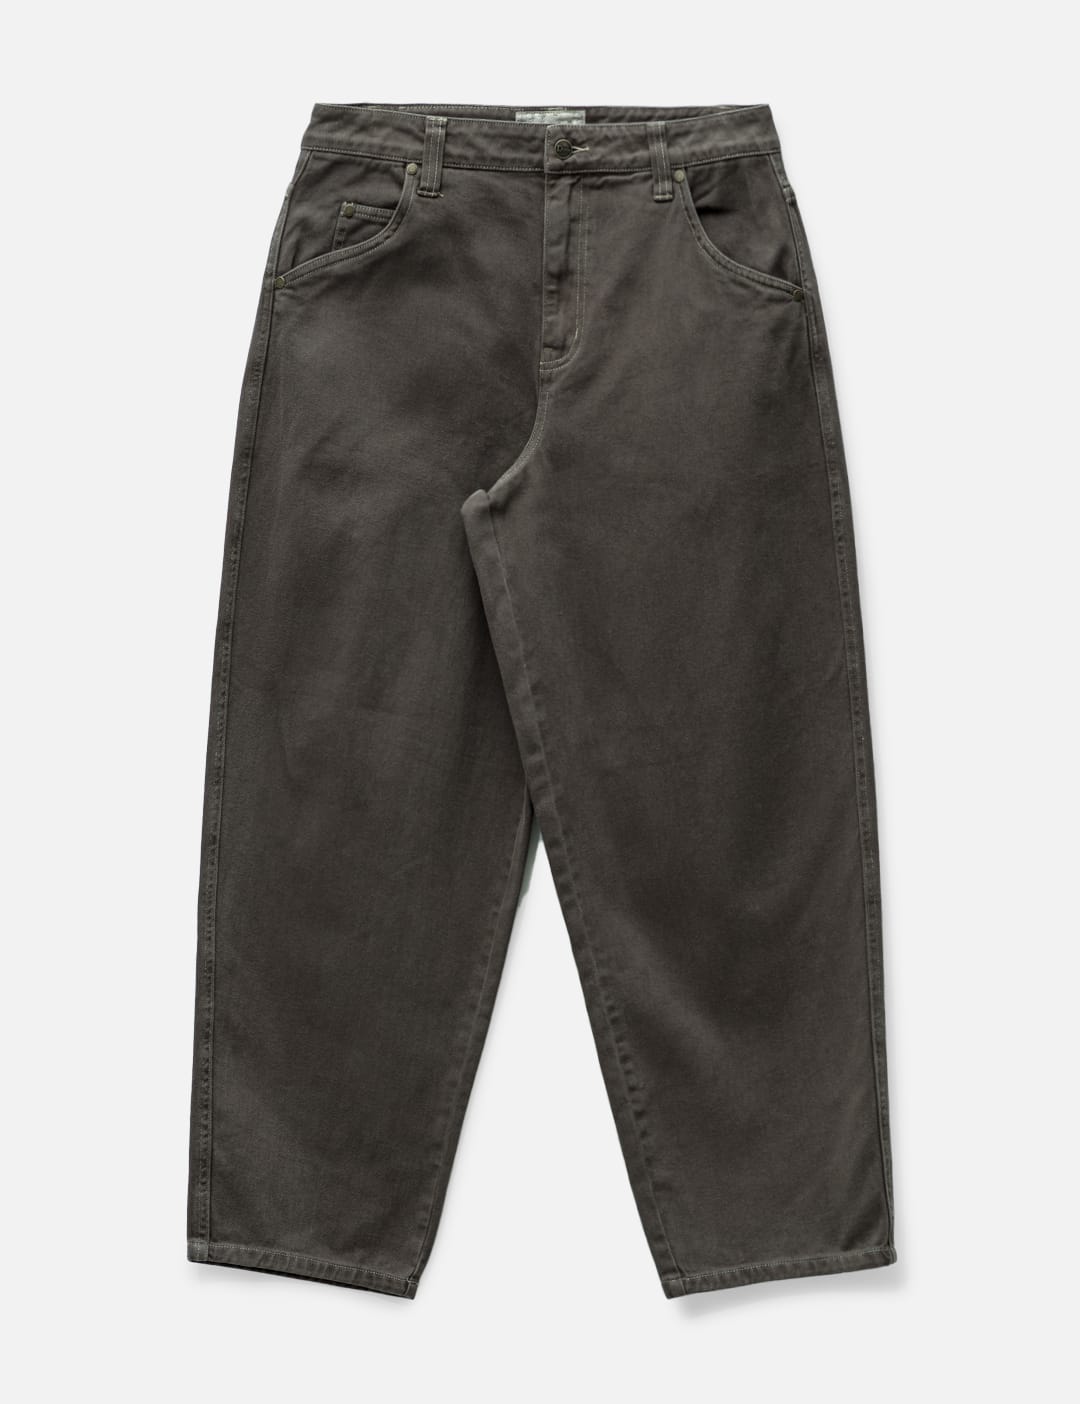 Dime - Dime Baggy Denim Pants | HBX - Globally Curated Fashion and 